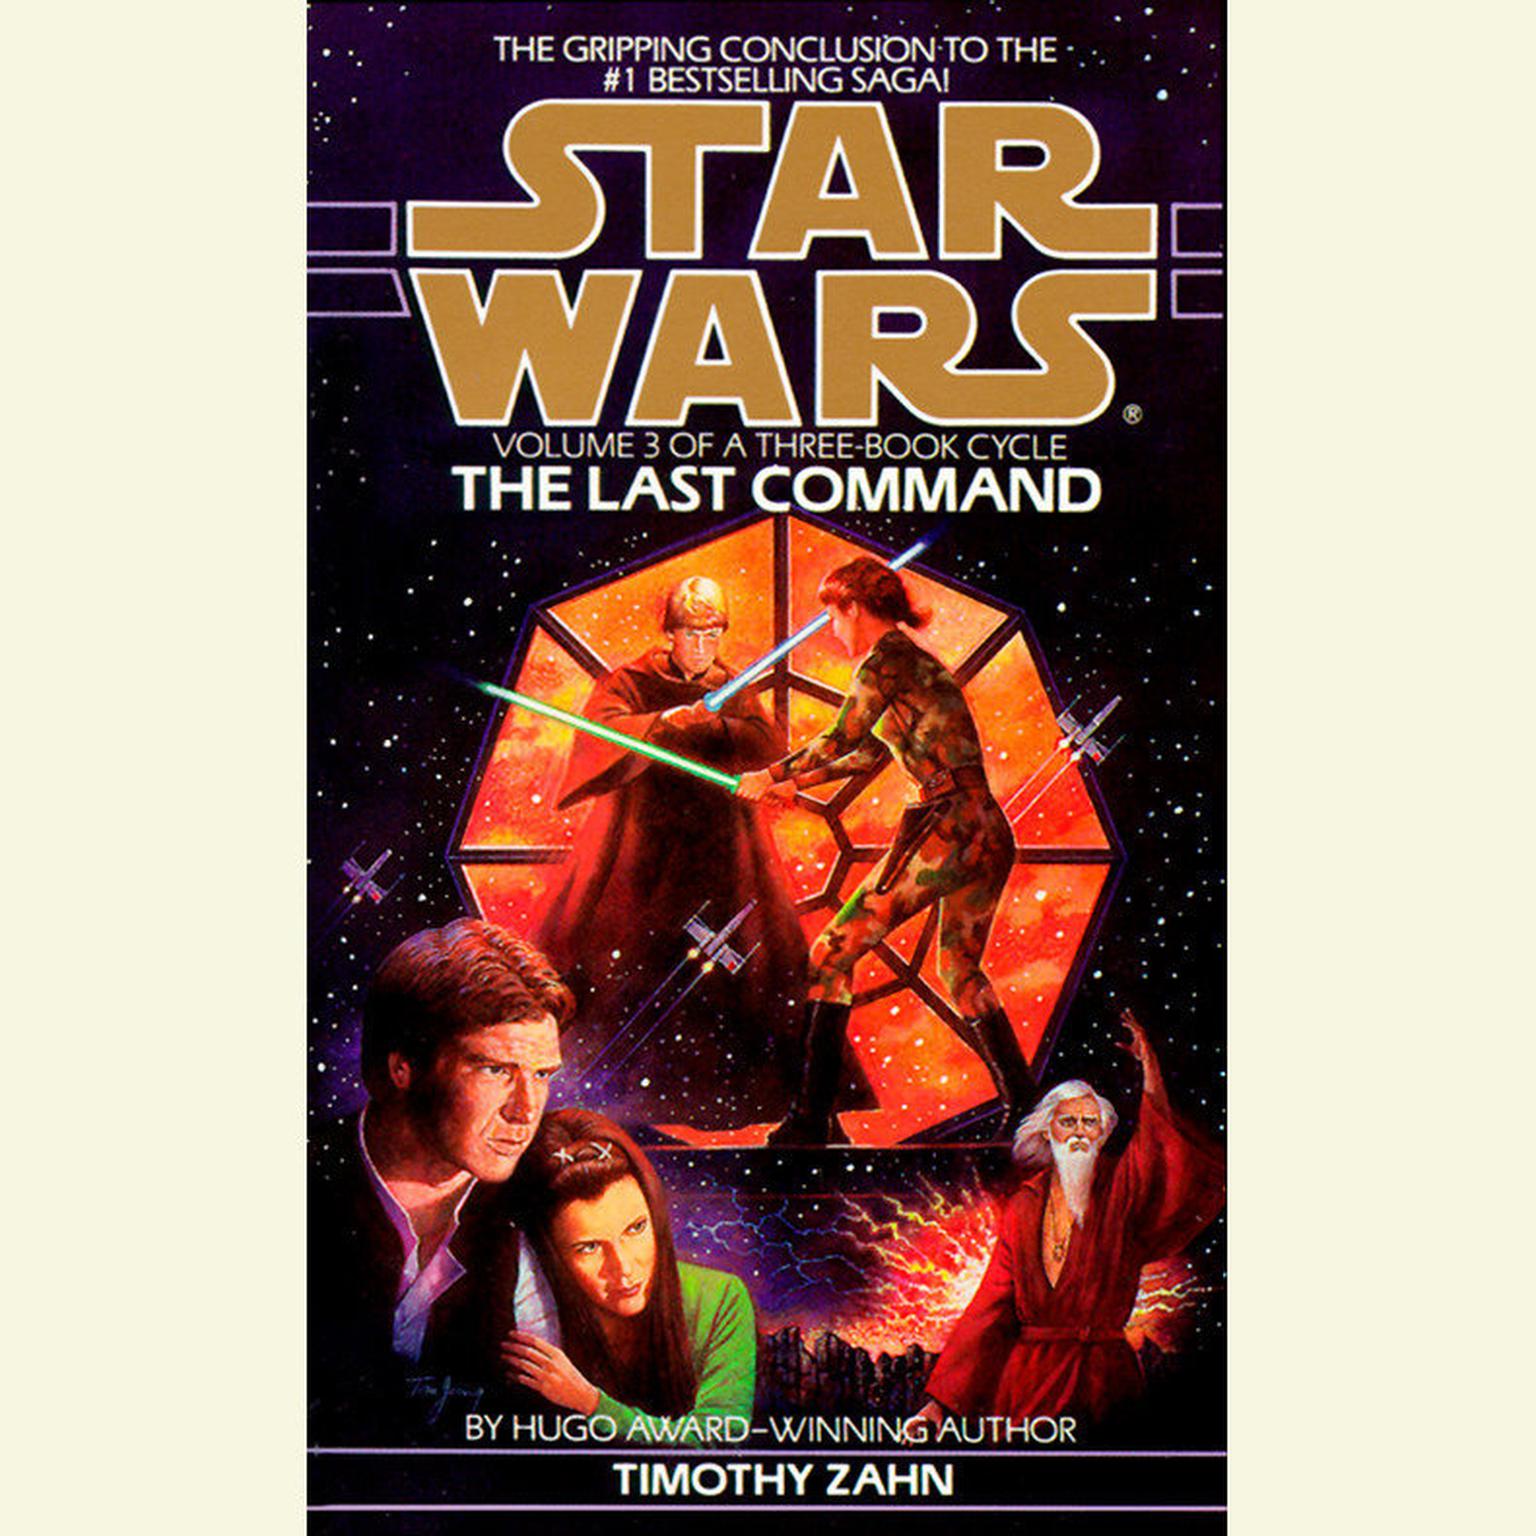 Star Wars: The Thrawn Trilogy: The Last Command (Abridged): The Thrawn Trilogy, Volume Three Audiobook, by Timothy Zahn